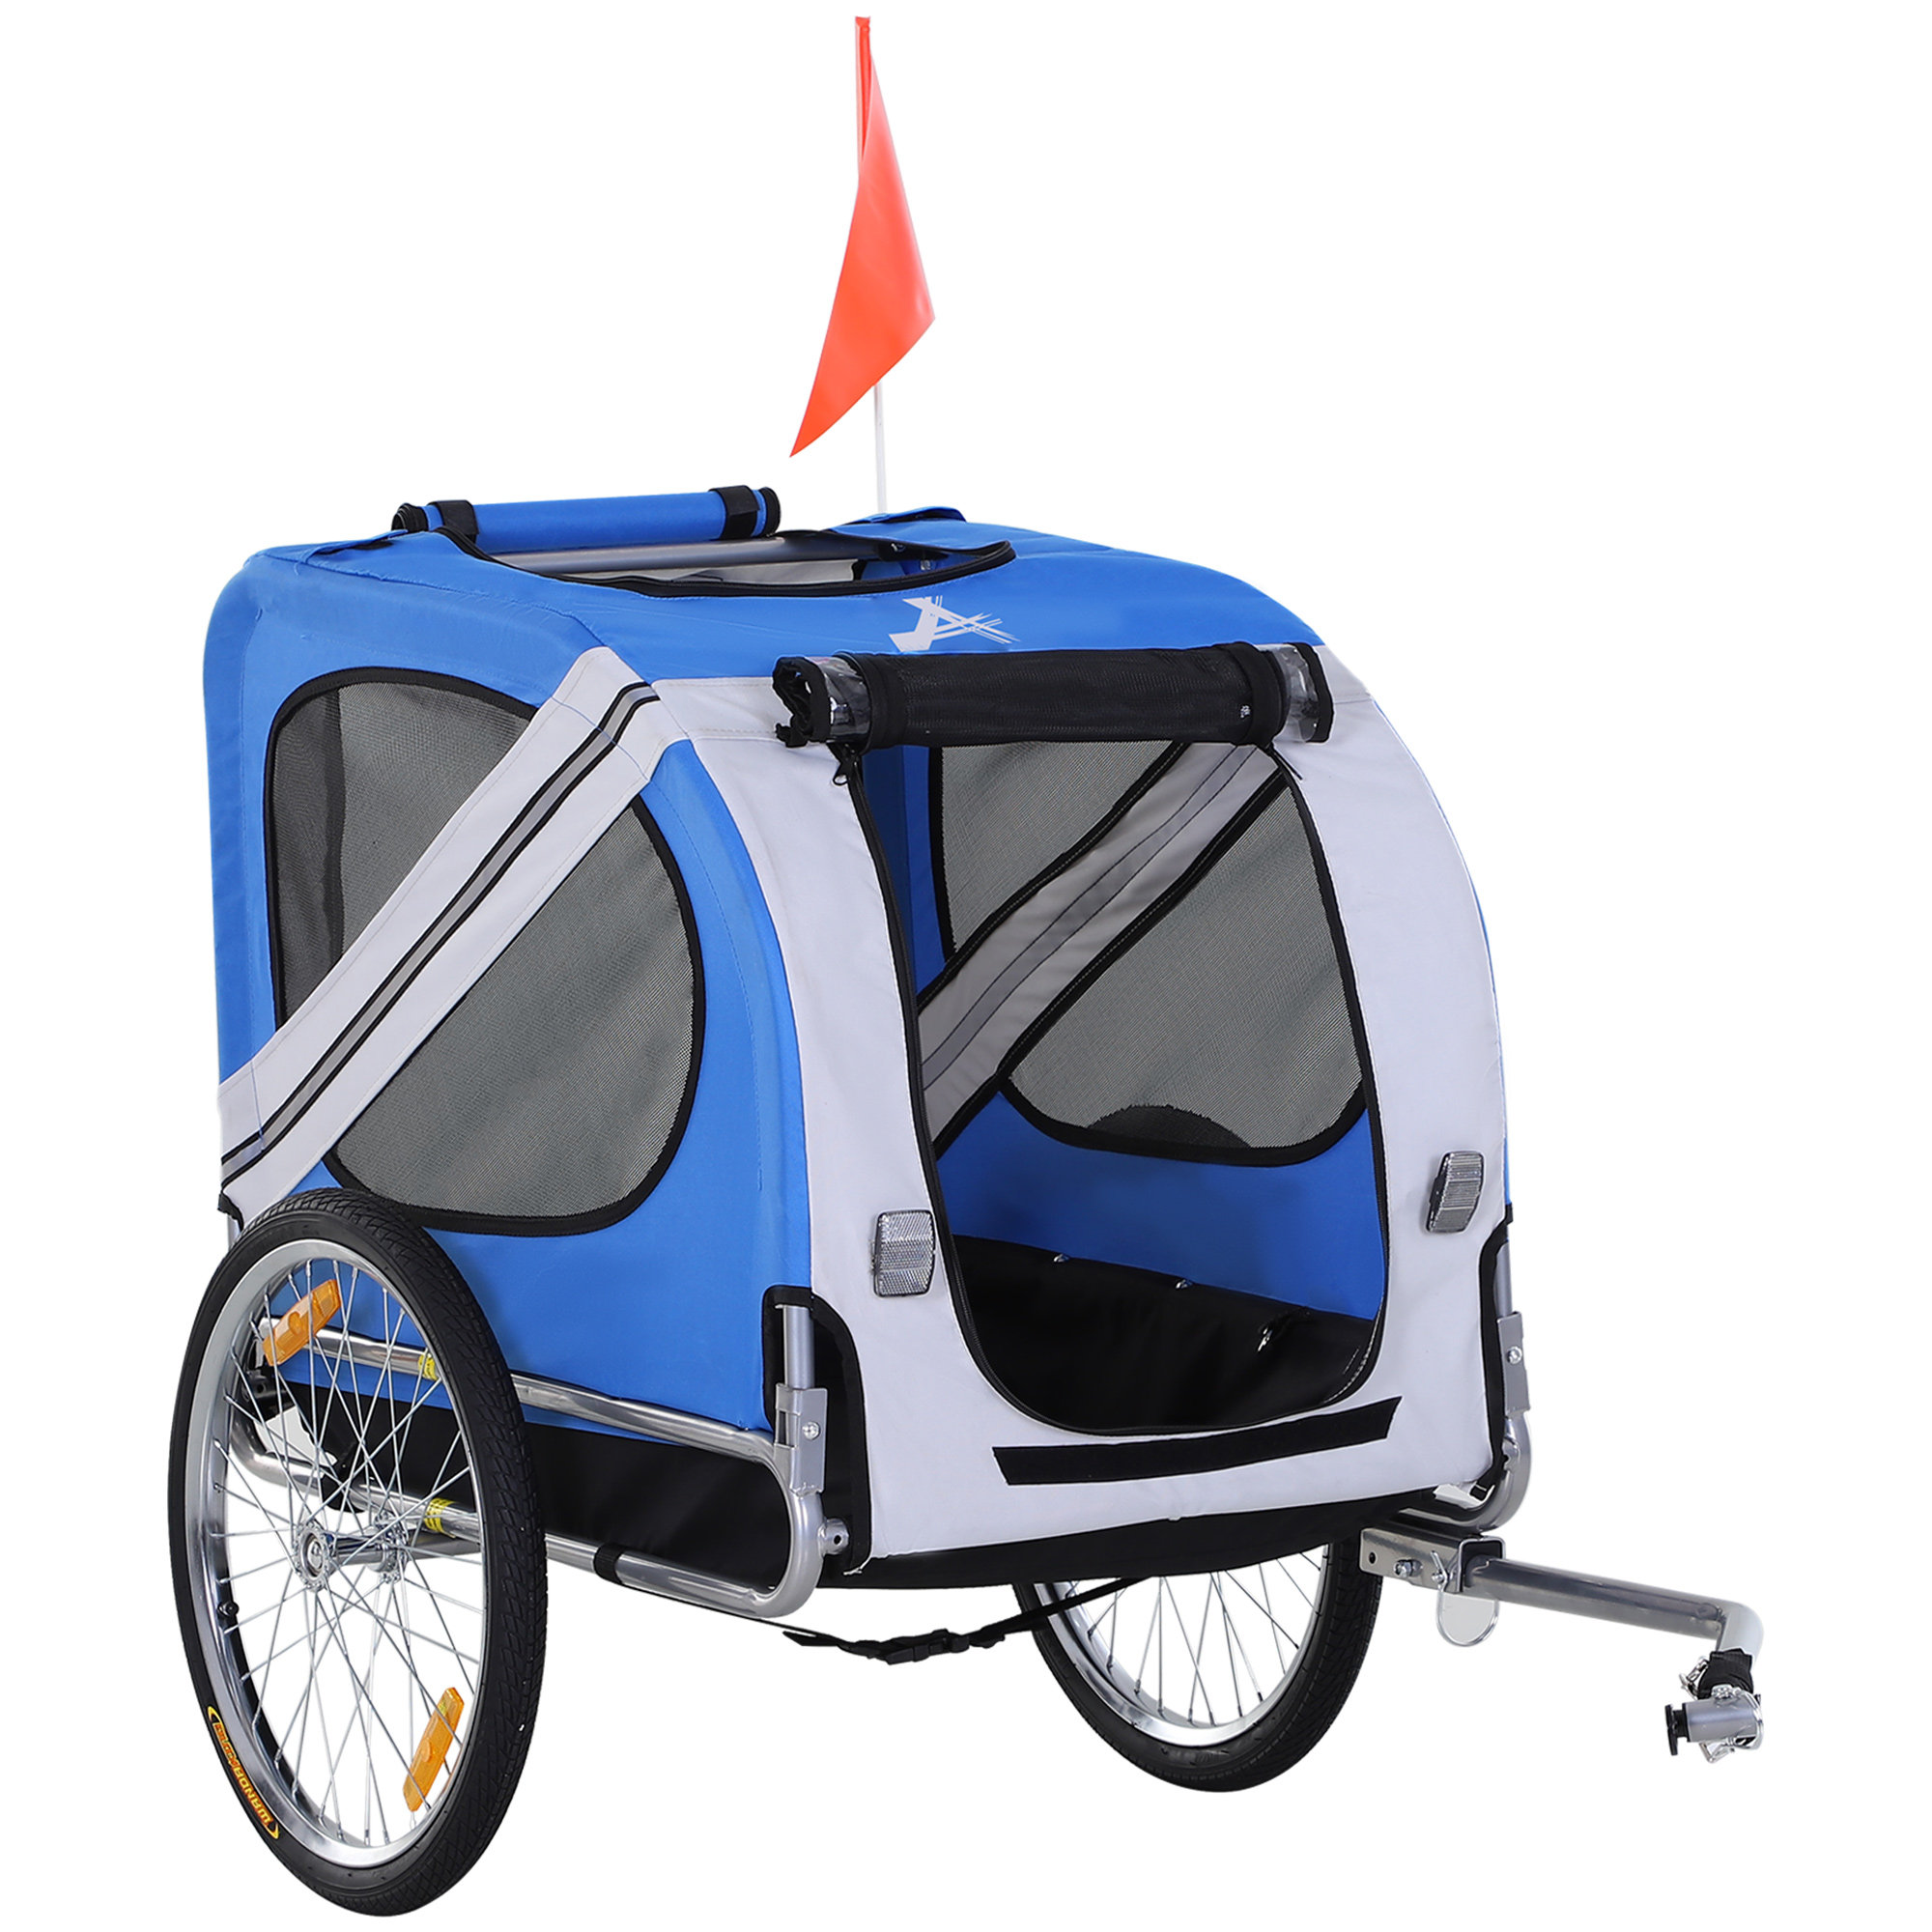 Dog Bike Trailer Pet Cart Bicycle Wagon Cargo Carrier Attachment For Travel  With 3 Entrances Large Wheels For Off-Road & Mesh Screen - Light Blue /